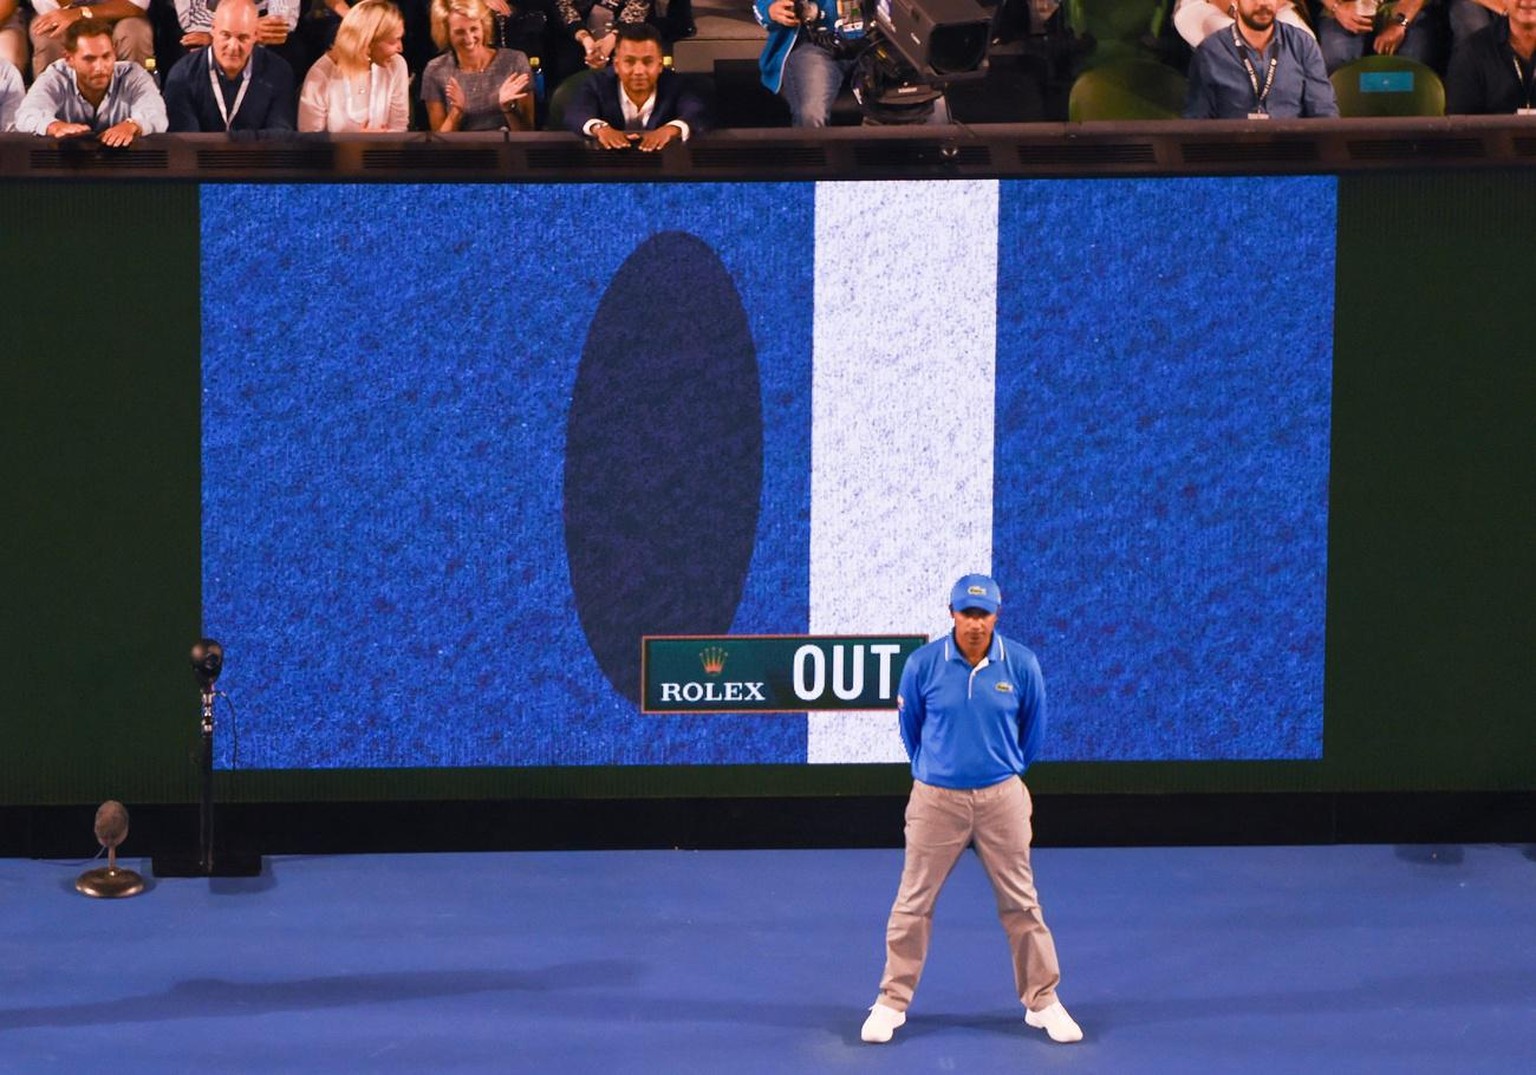 epa05118202 (FILE) - A screen shows the hawk-eye review during the third round match between Nick Kyrgios of Australia and Tomas Berdych of Czech Republic at the Australian Open tennis tournament in M ...